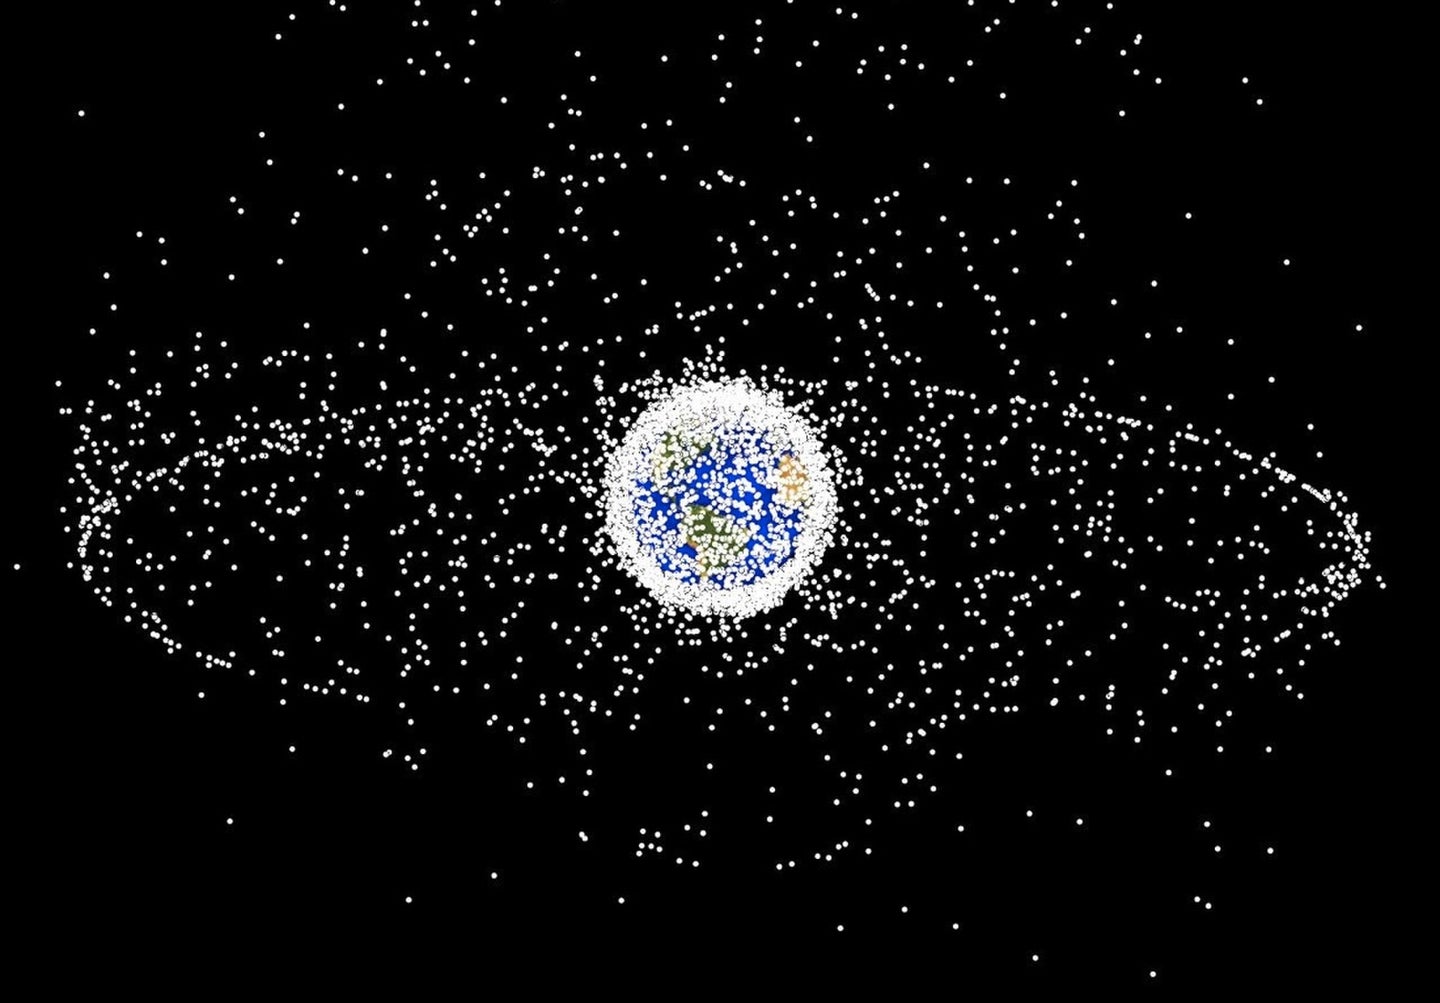 an illustration of earth surrounded by white dots representing debris